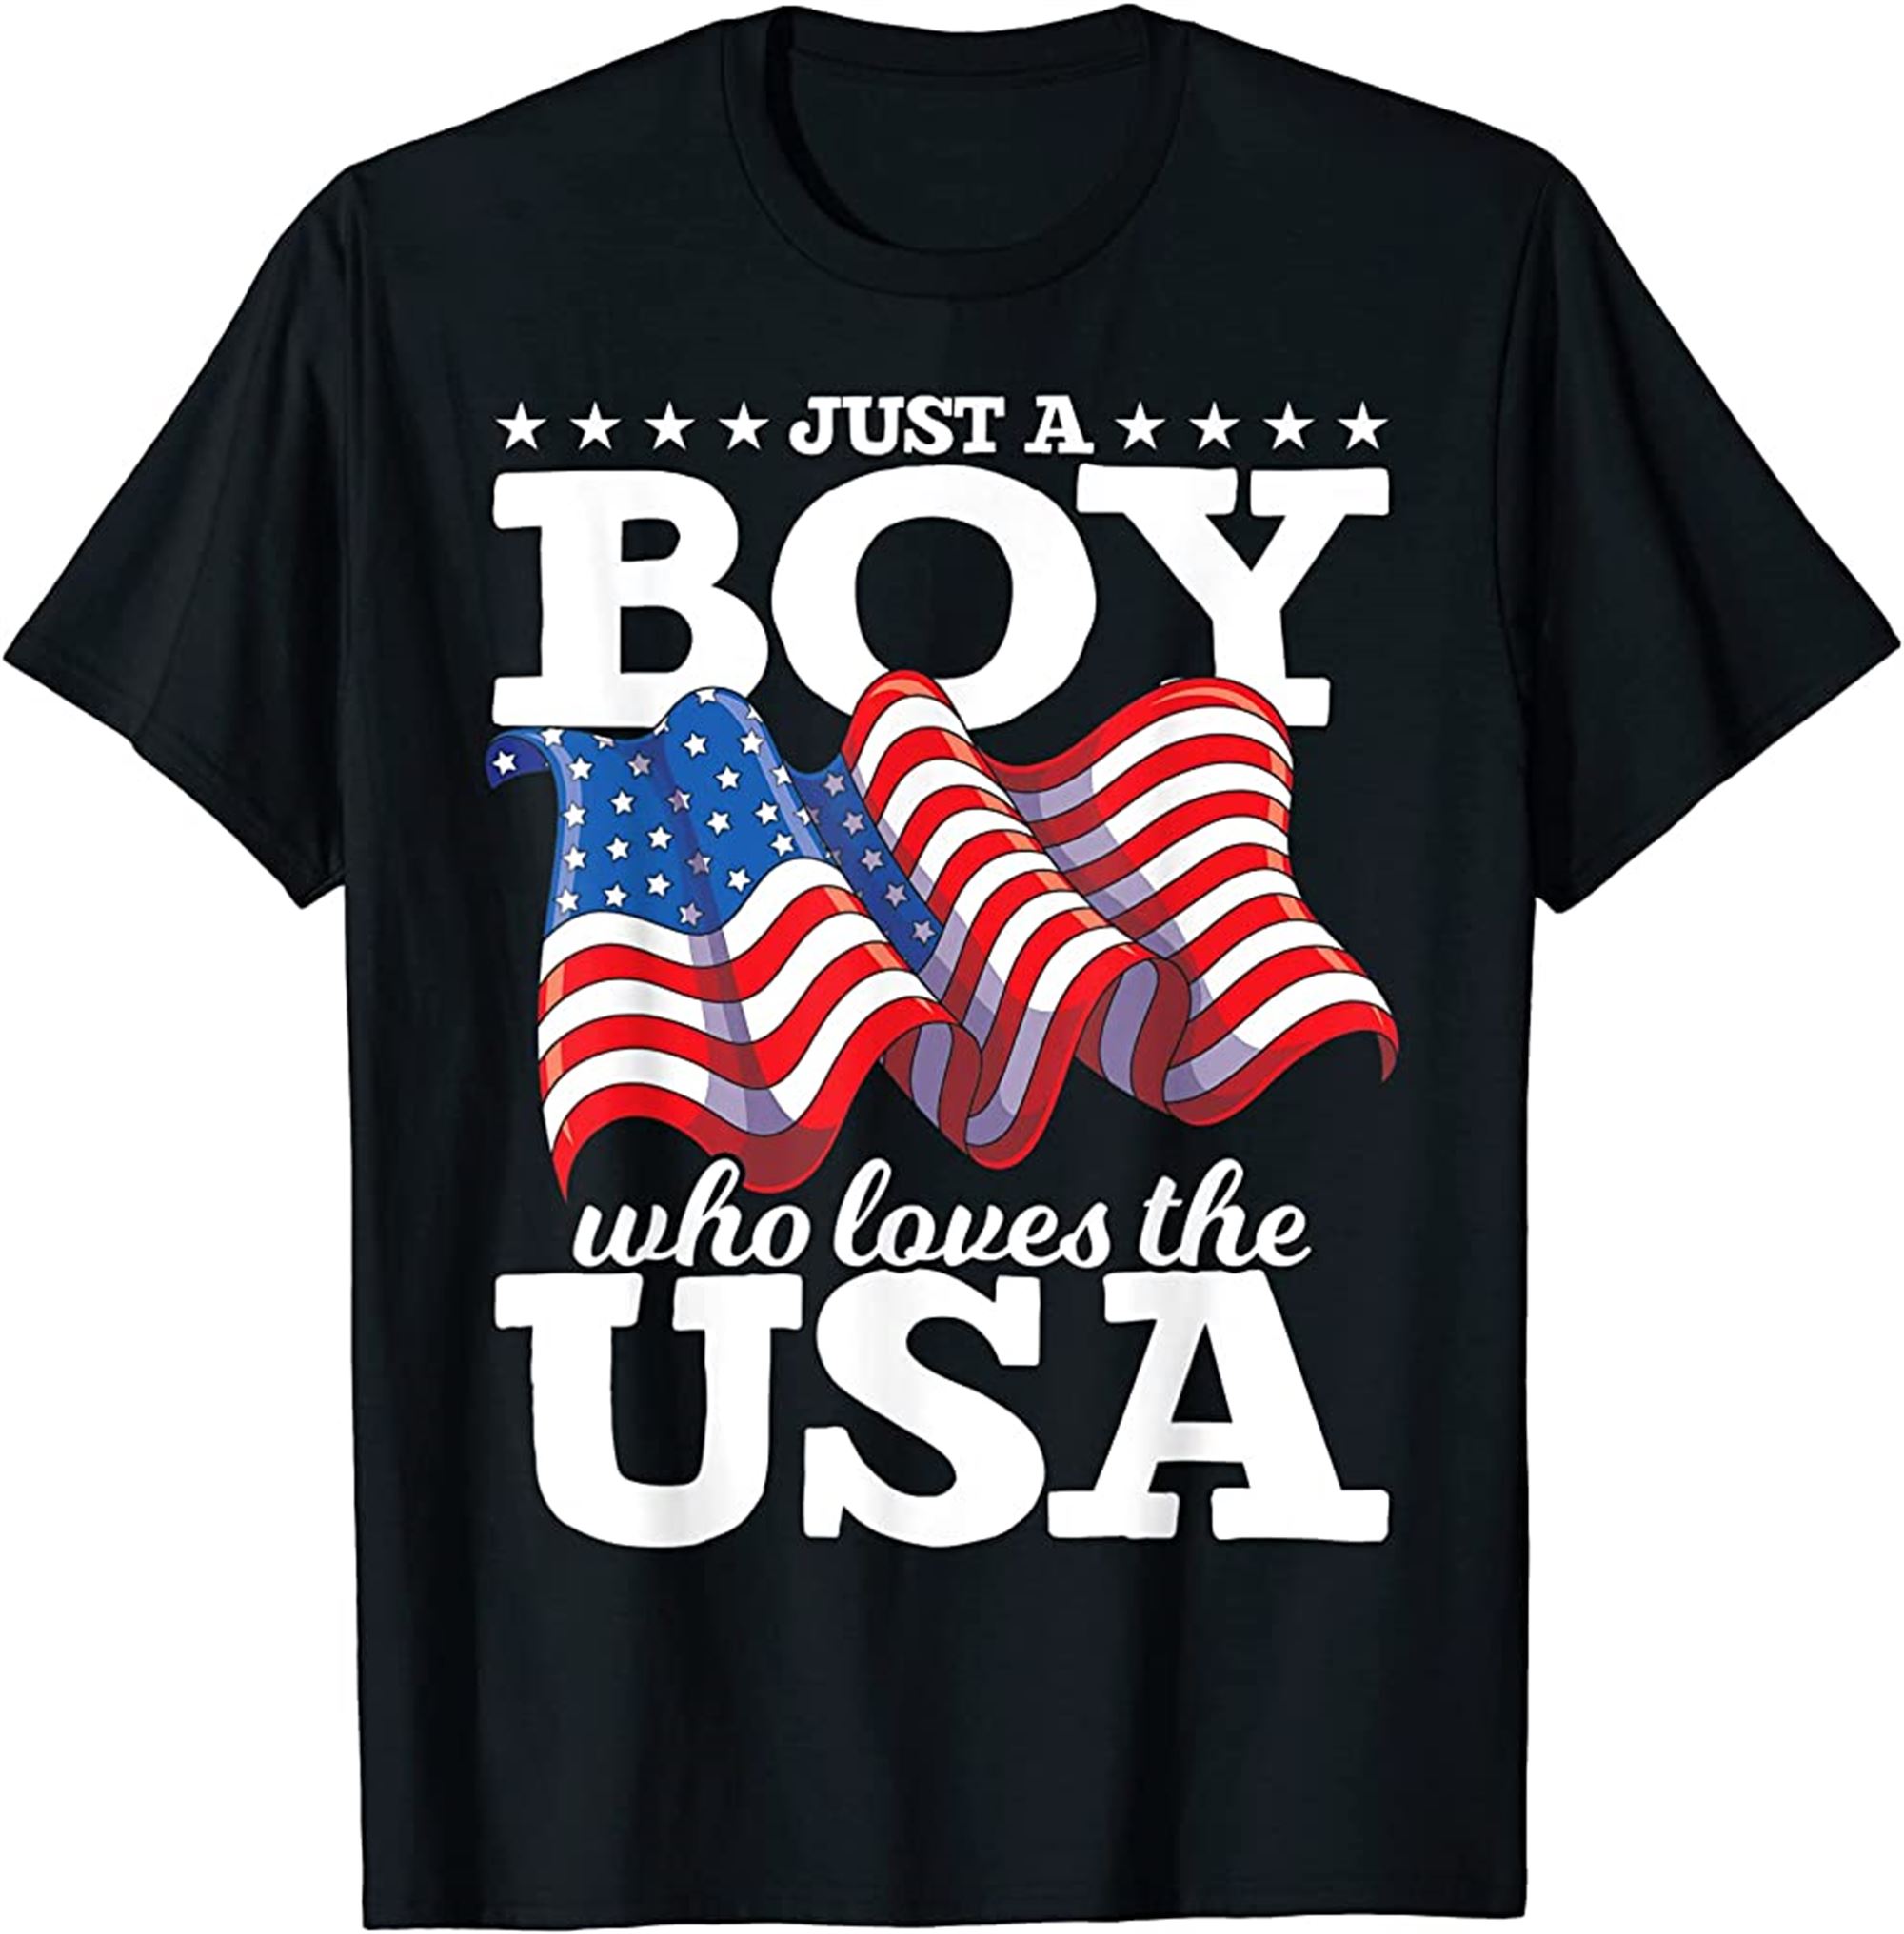 United States Patriotic American Us Flag Boys 4th Of July T-shirt Size Up To 5xl